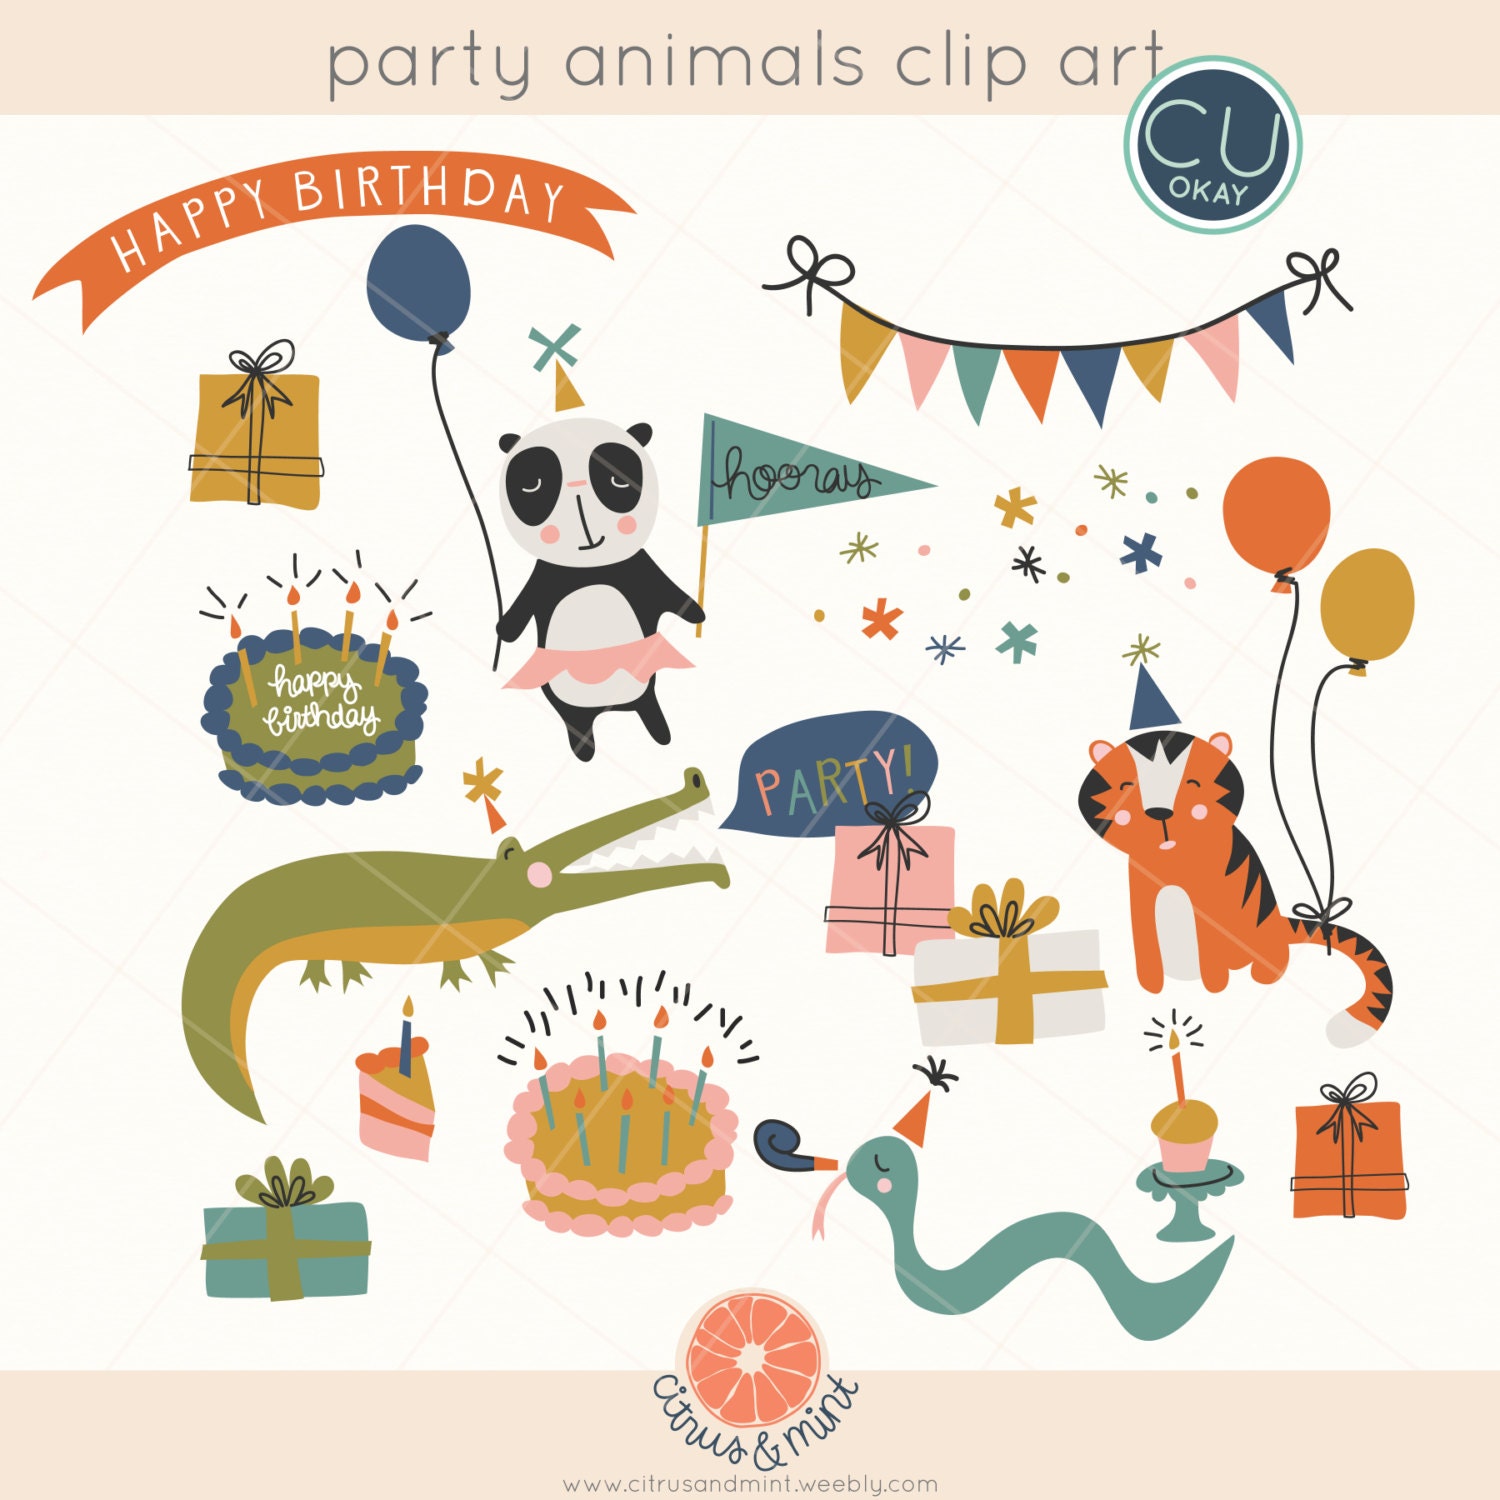 clipart party animals - photo #7